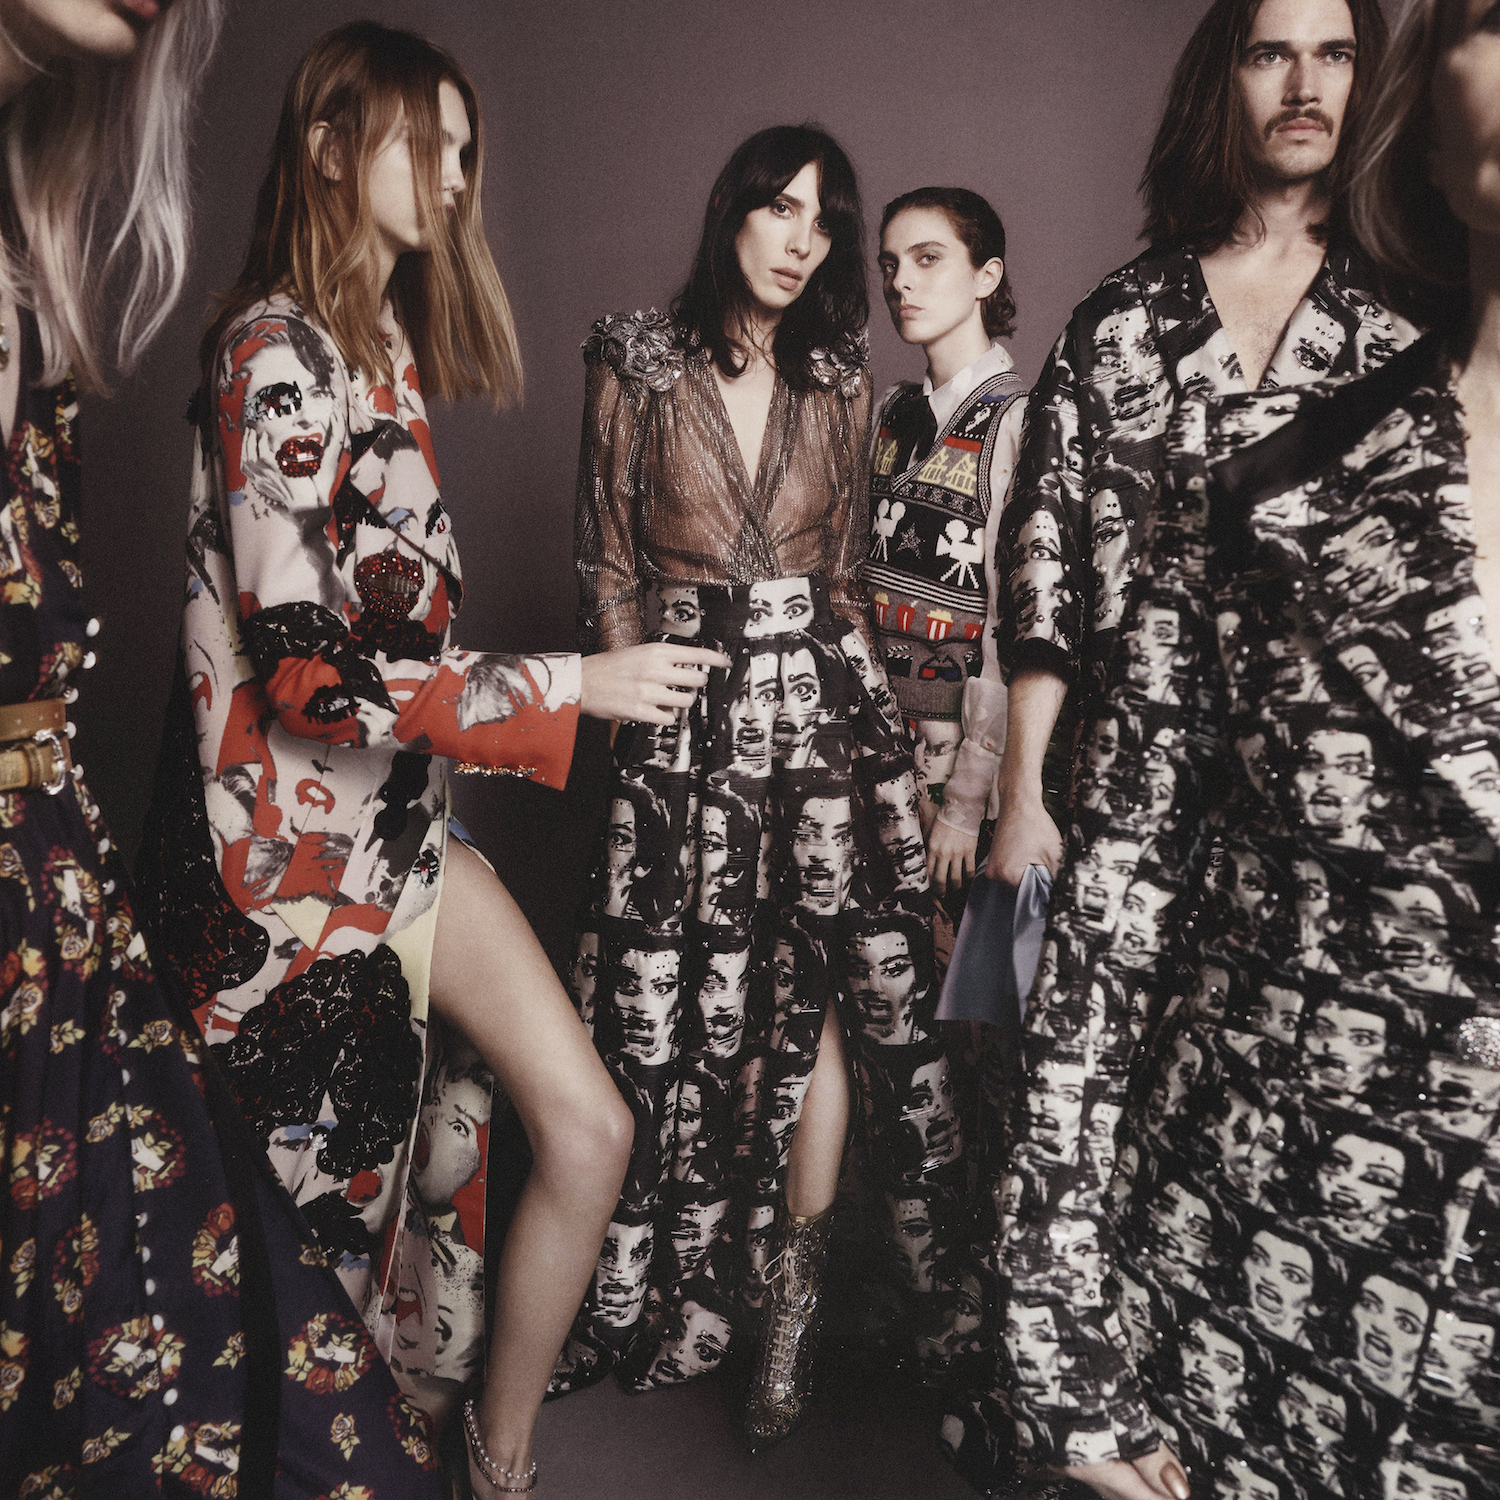 Louis Vuitton - Marc Jacobs' muse Edie Campbell in the Louis Vuitton  Spring/Summer 2014 Campaign, shot by Steven Meisel.